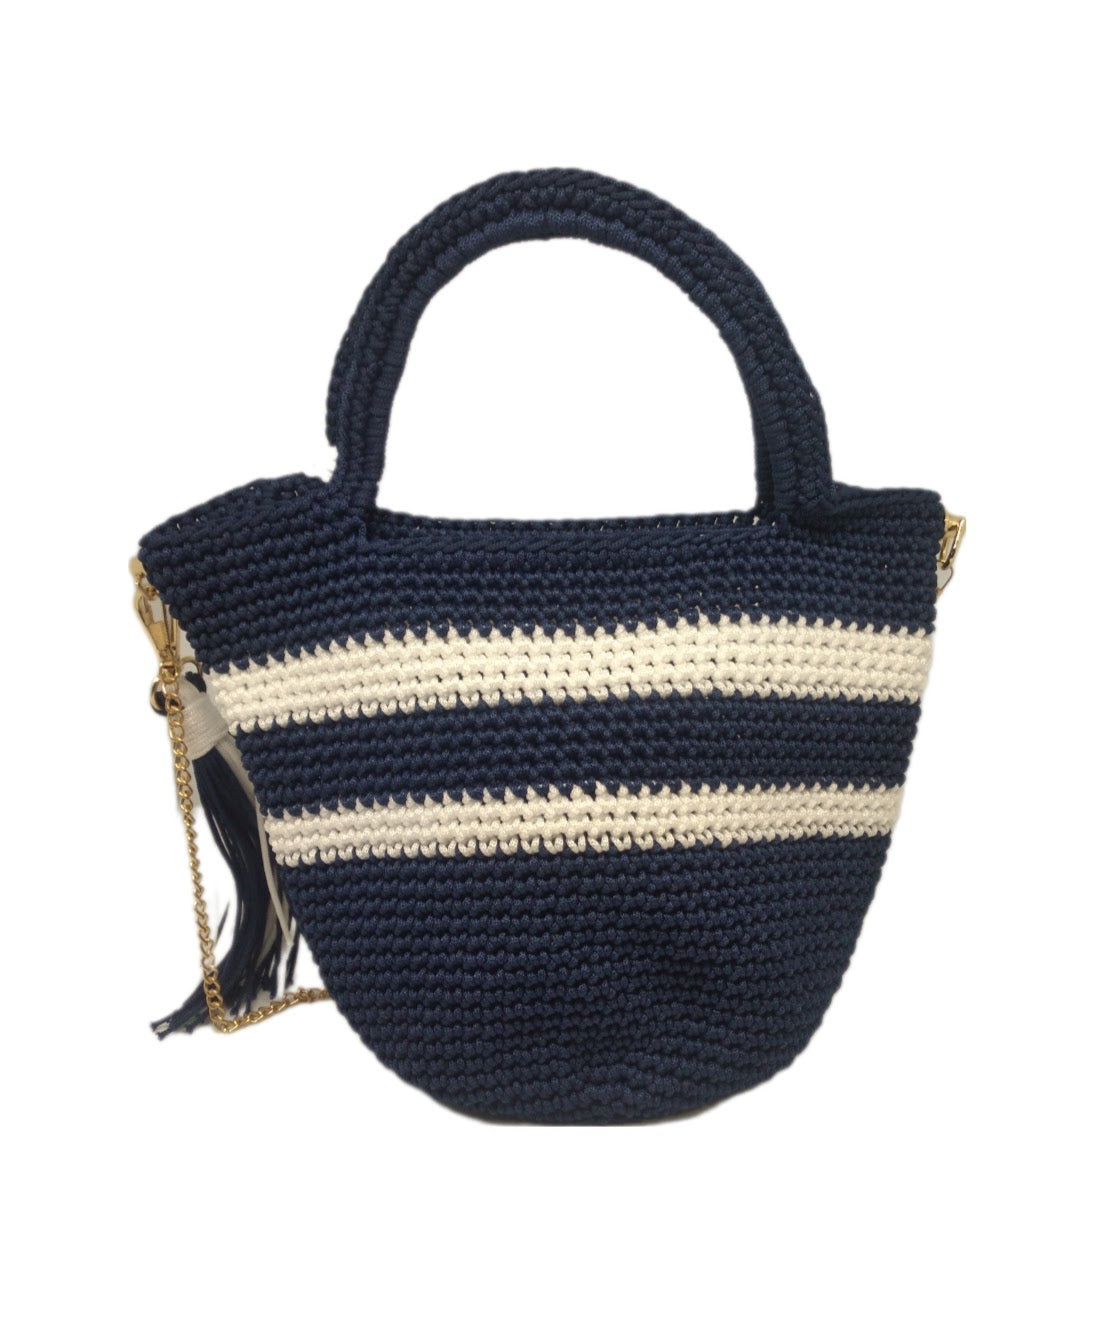 Back view of Navy and white striped crochet handbag with lace bow detail